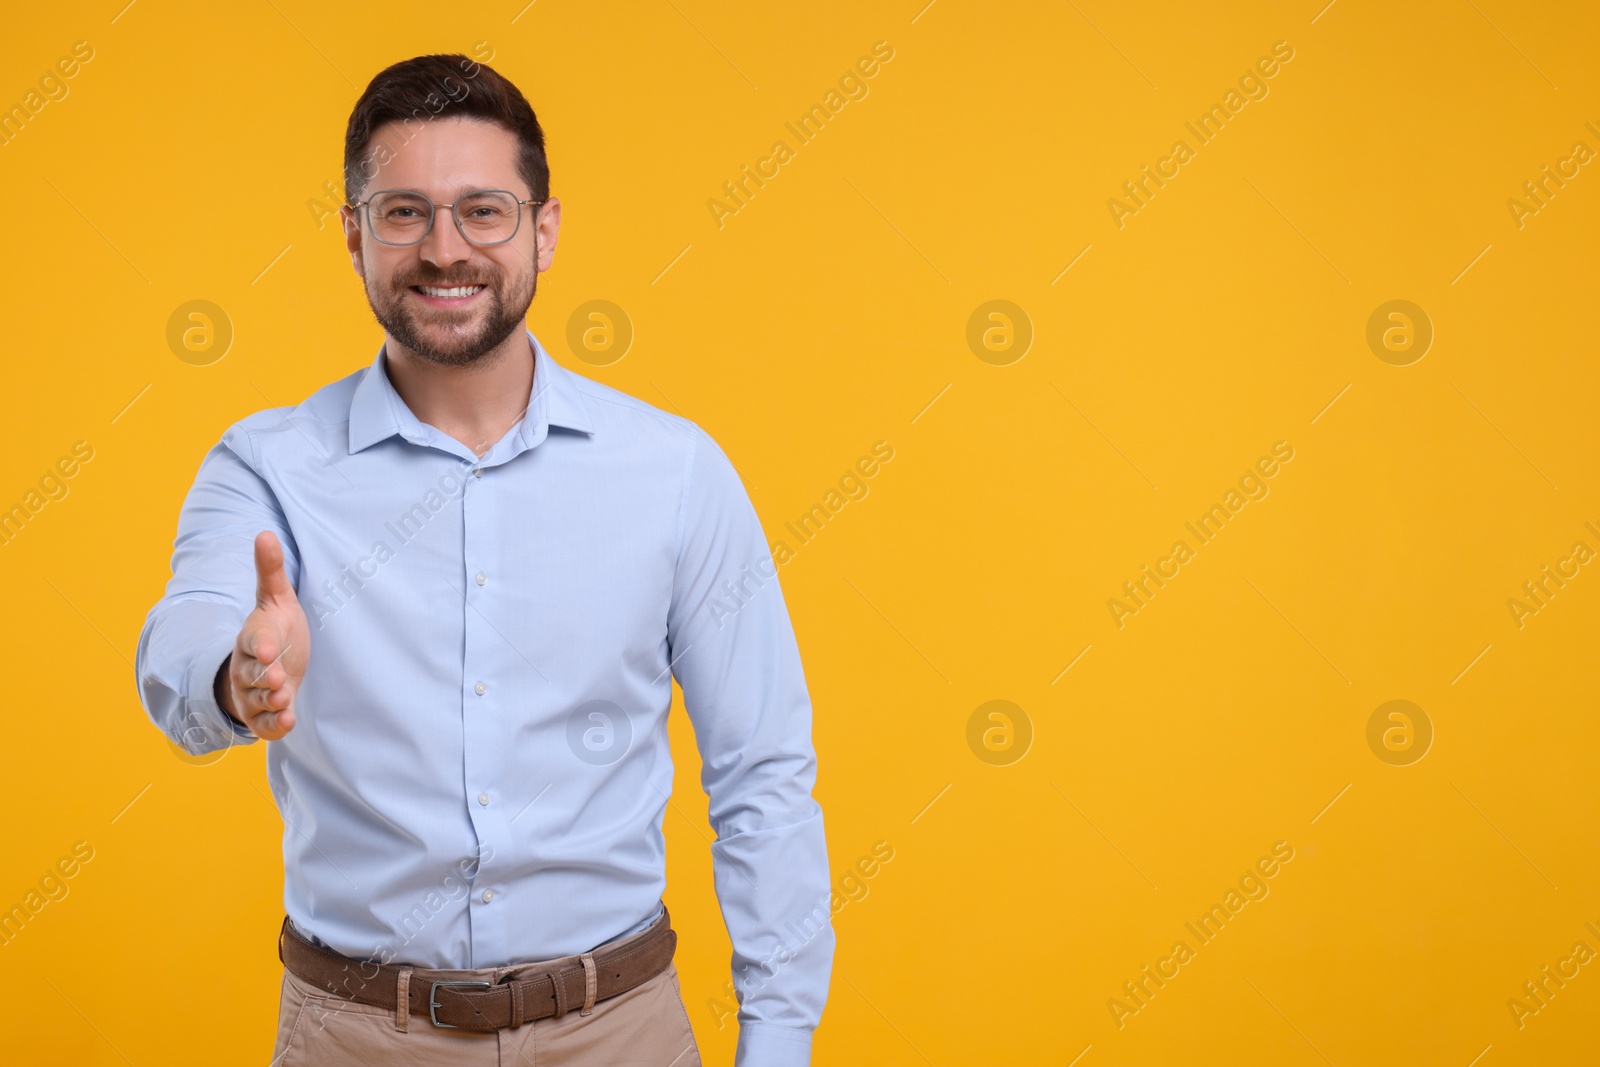 Photo of Happy man welcoming and offering handshake on yellow background. Space for text